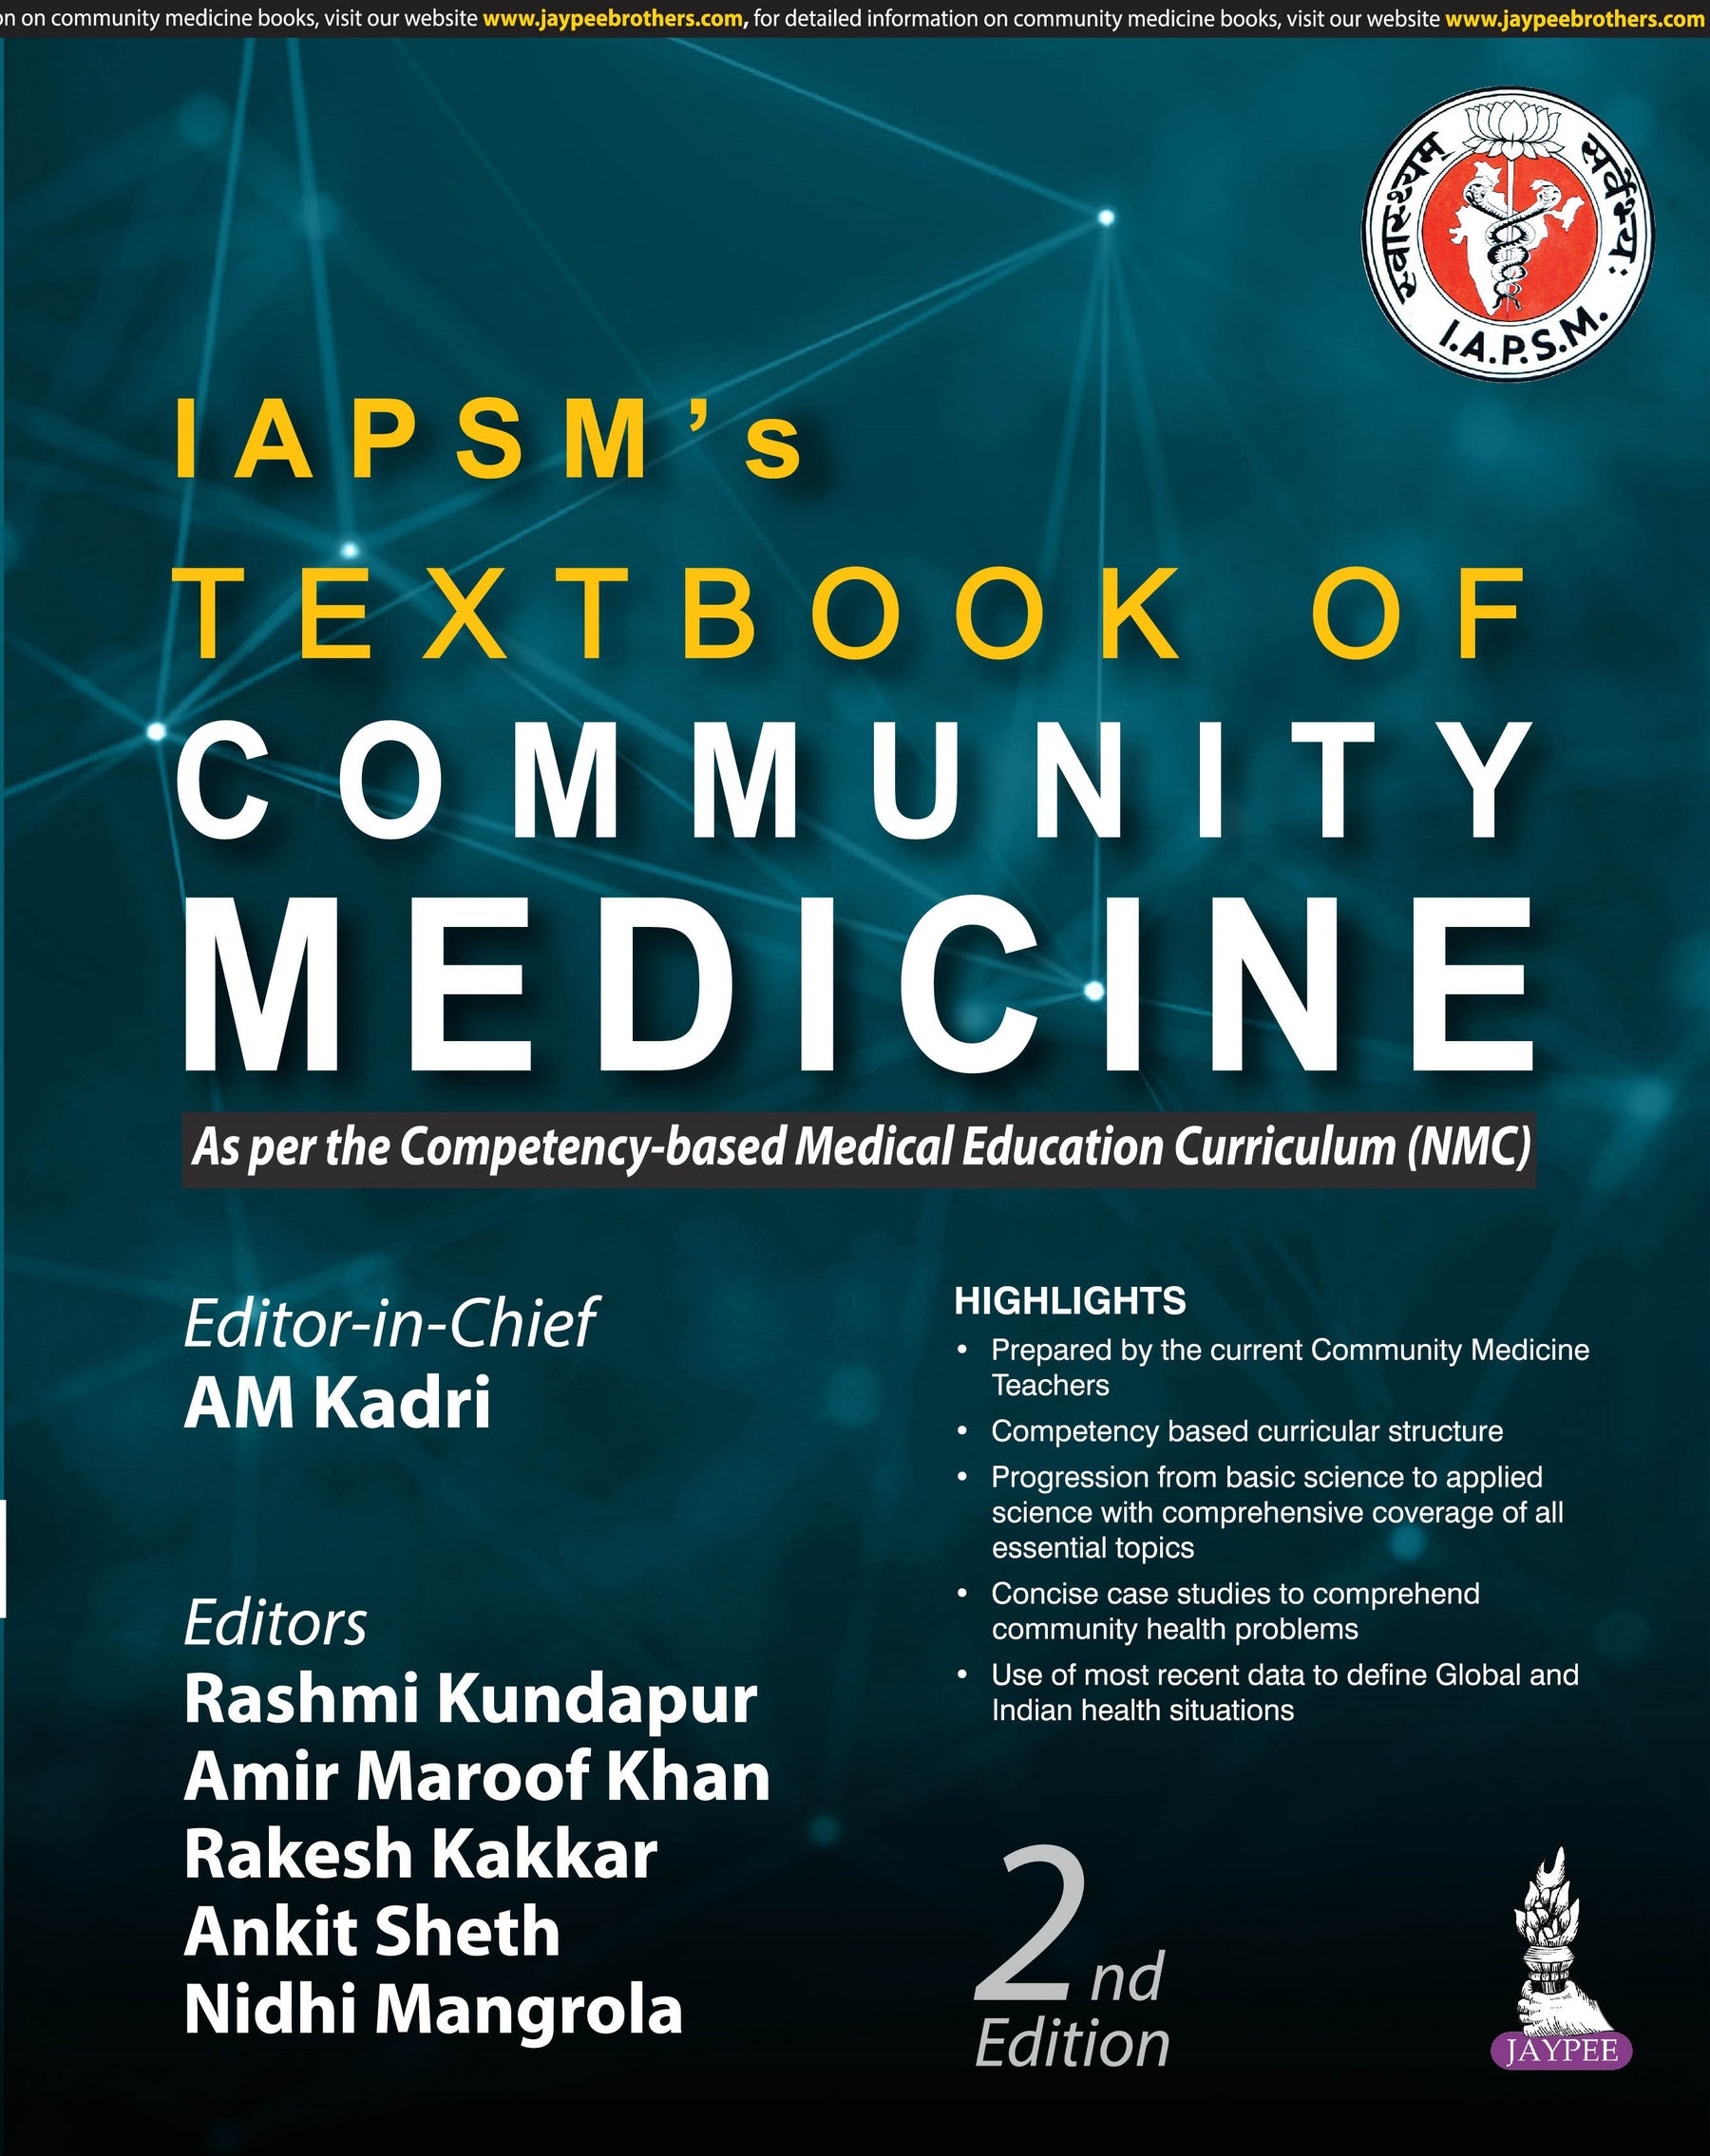 IAPSM’S TEXTBOOK OF COMMUNITY MEDICINE: AS PER THE COMPETENCY-BASED MEDICAL EDUCATION CURRICULUM (NM,2/E,AM KADRI